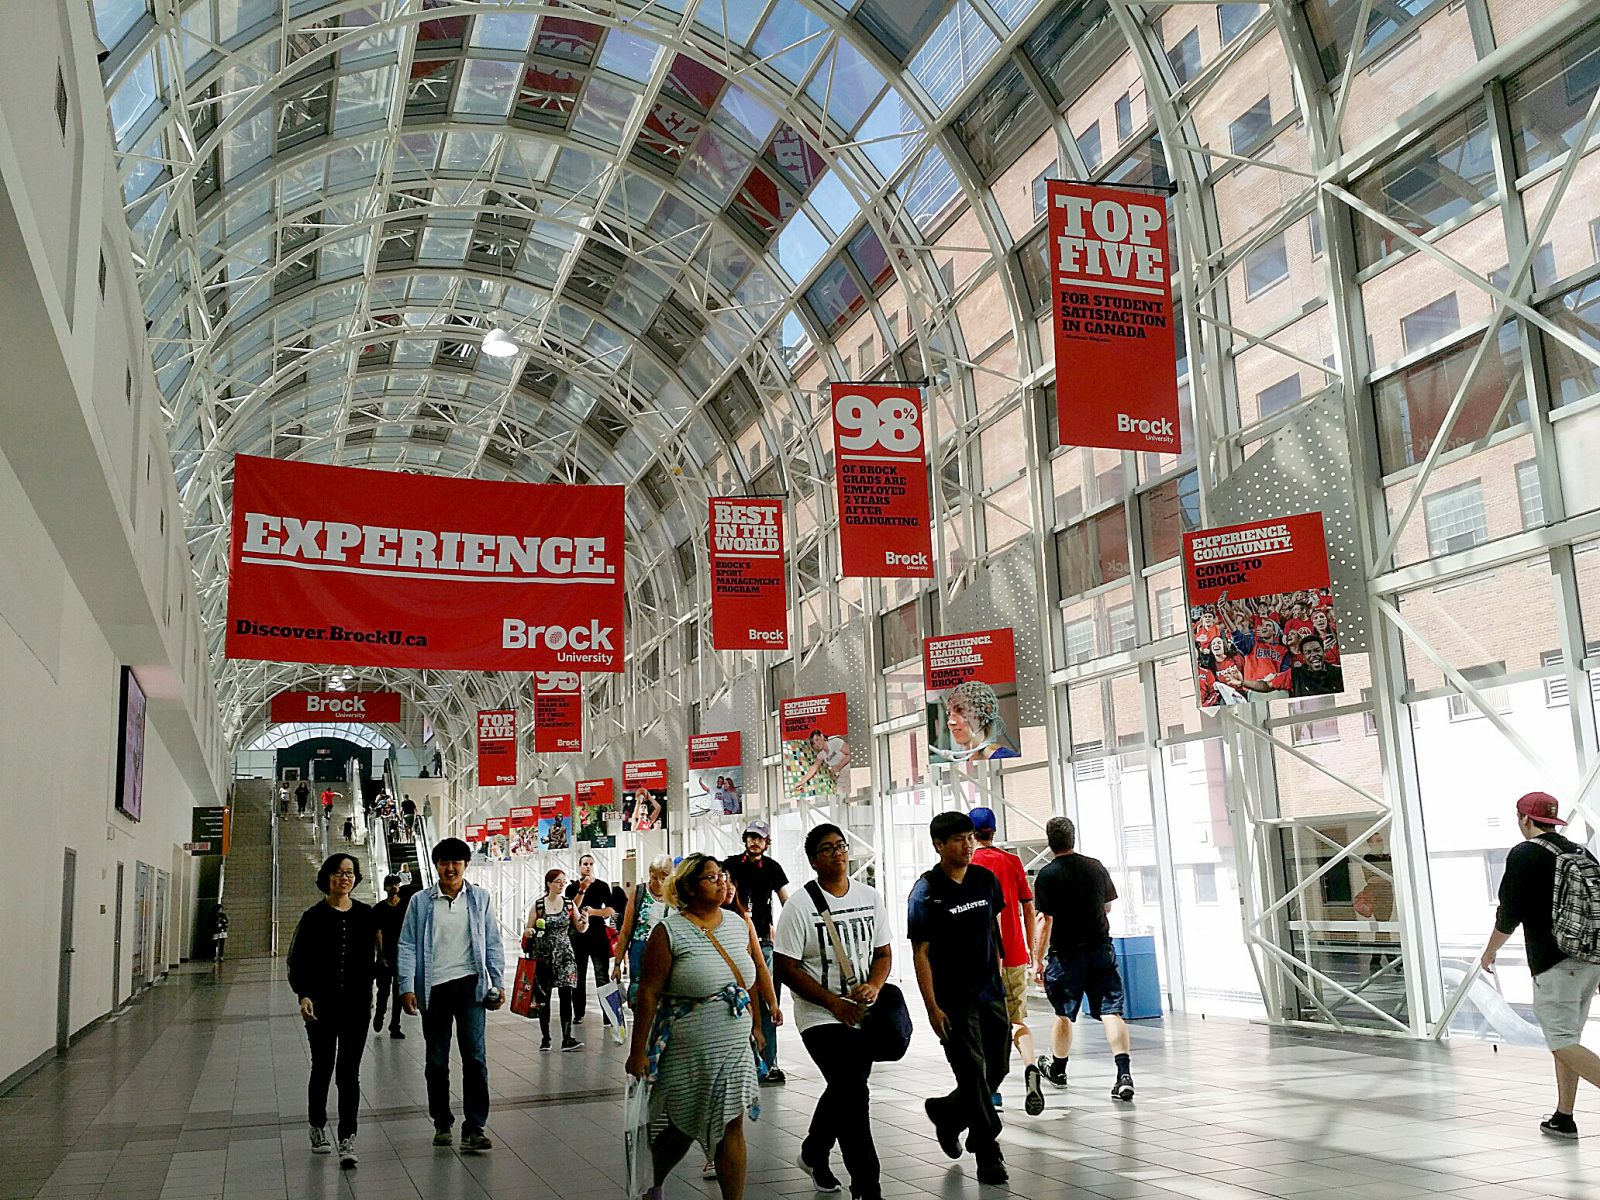 Brock University is spreading its message at the Skywalk in Toronto, reaching thousands of pedestrians in the area of Union Station.